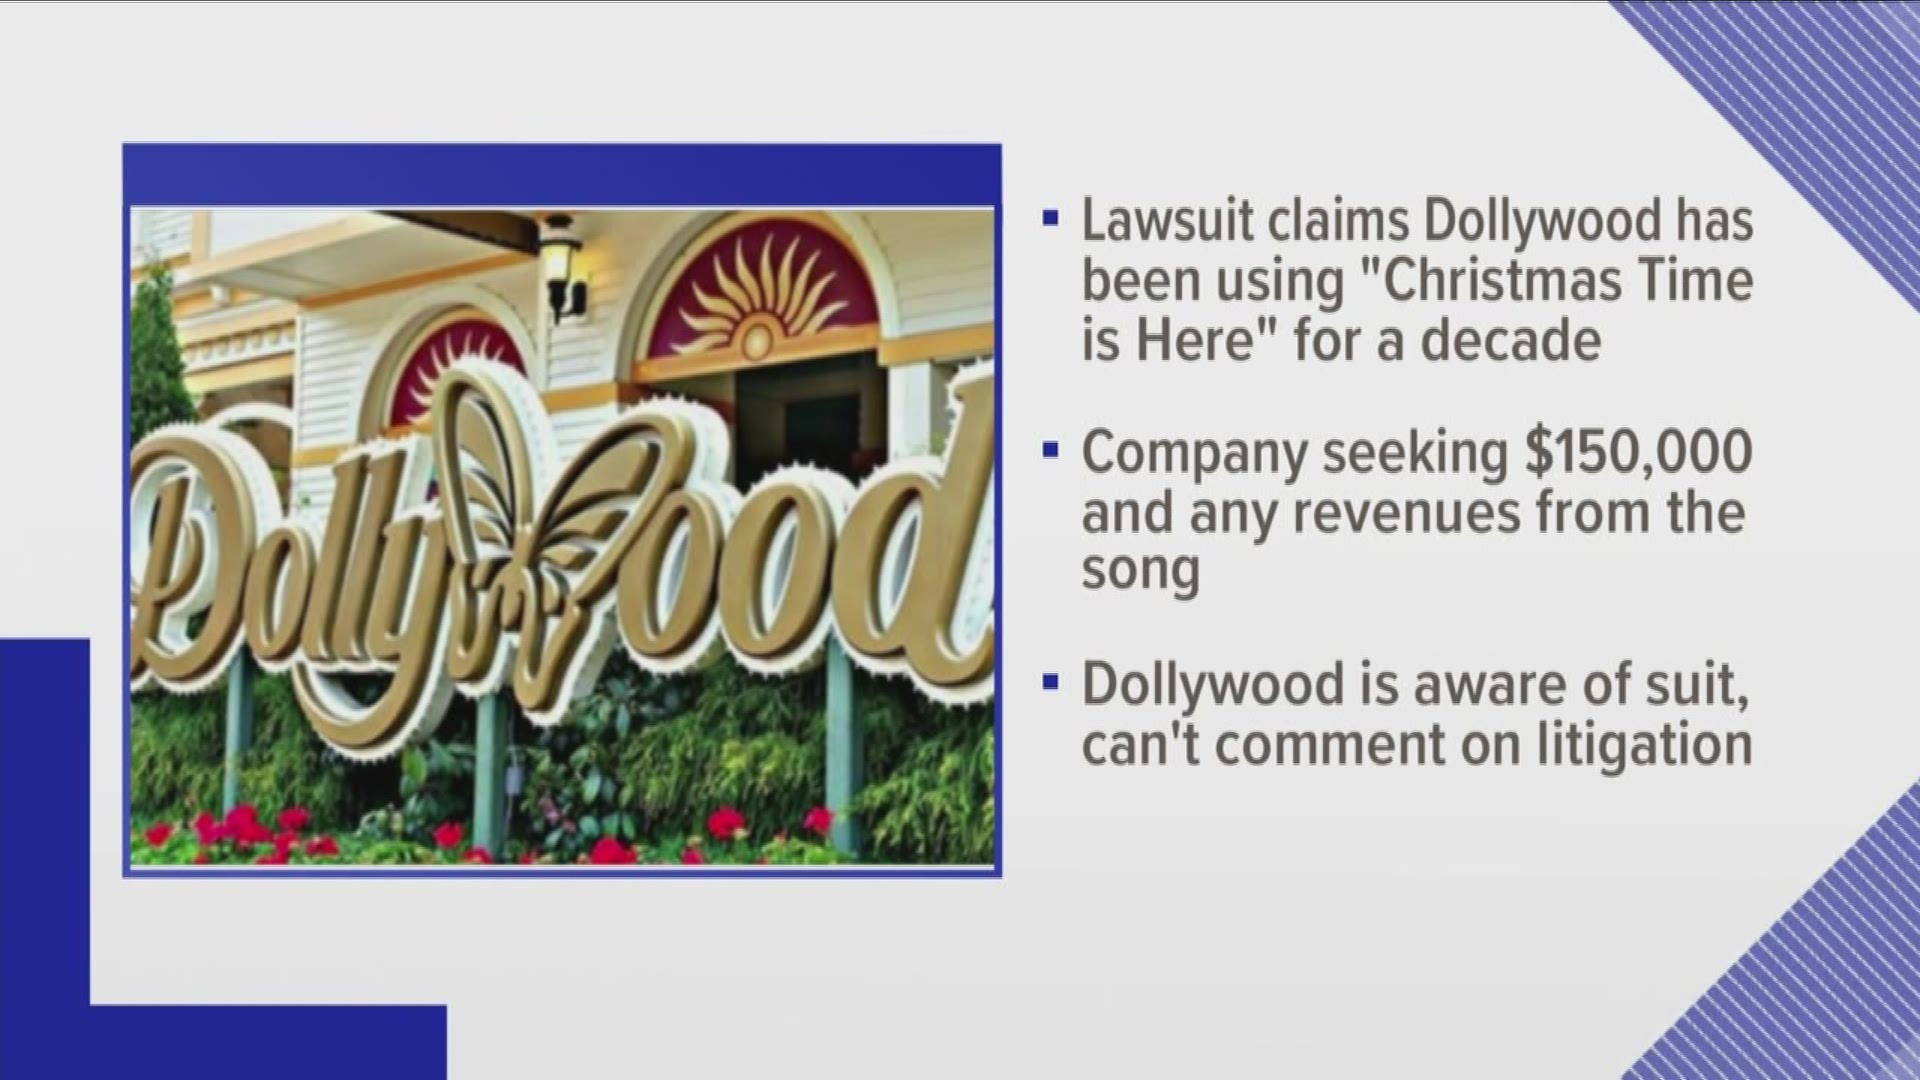 The suit claims Dollywood had been using the song without the proper license for many years in its annual Christmas productions.